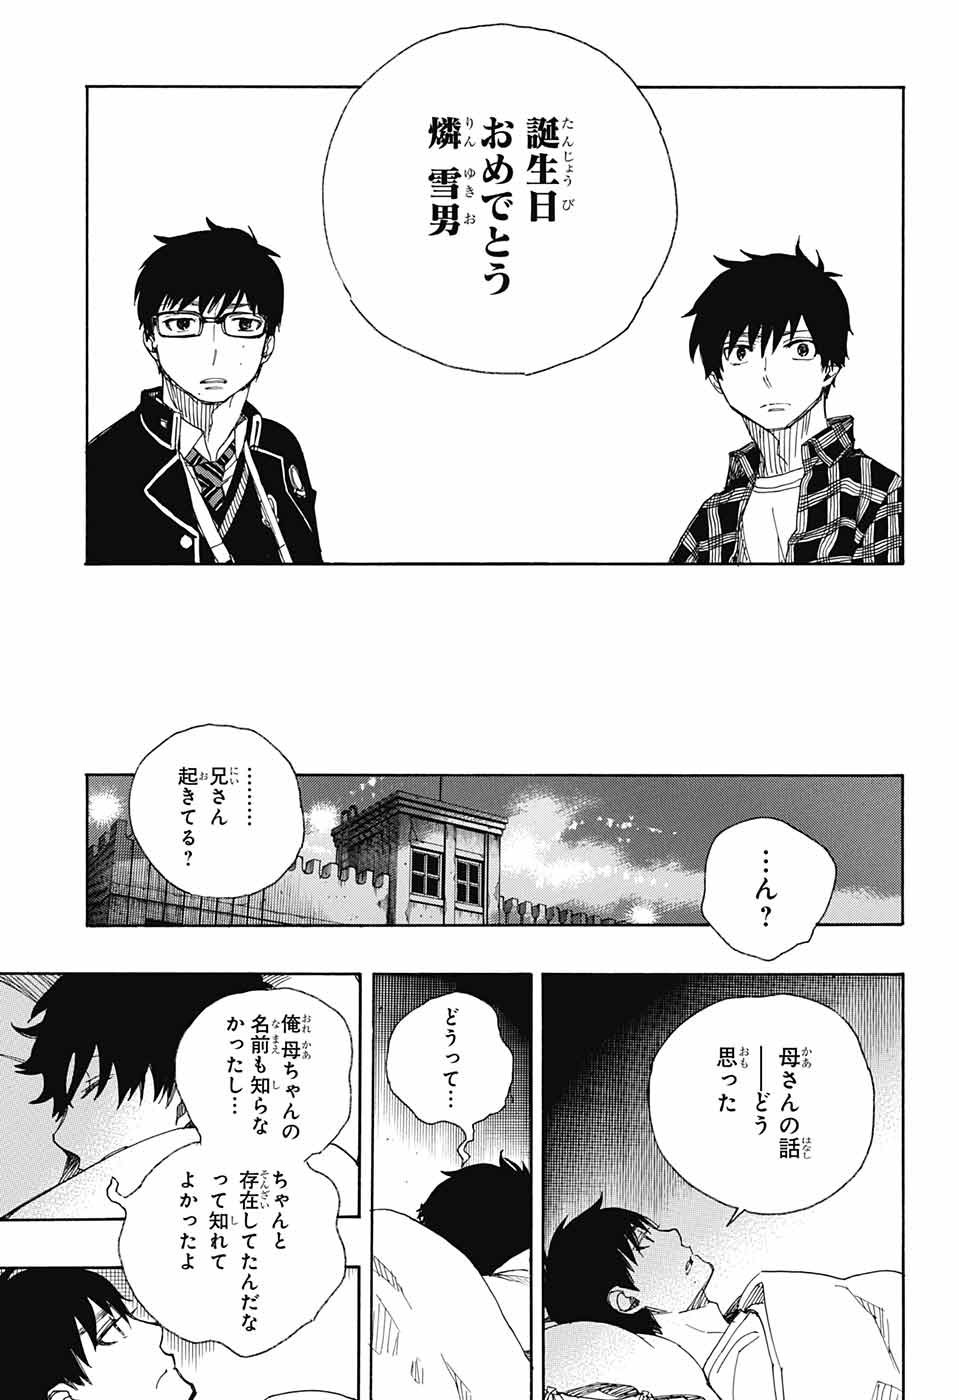 Ao no Exorcist - Chapter 89 - Page 33